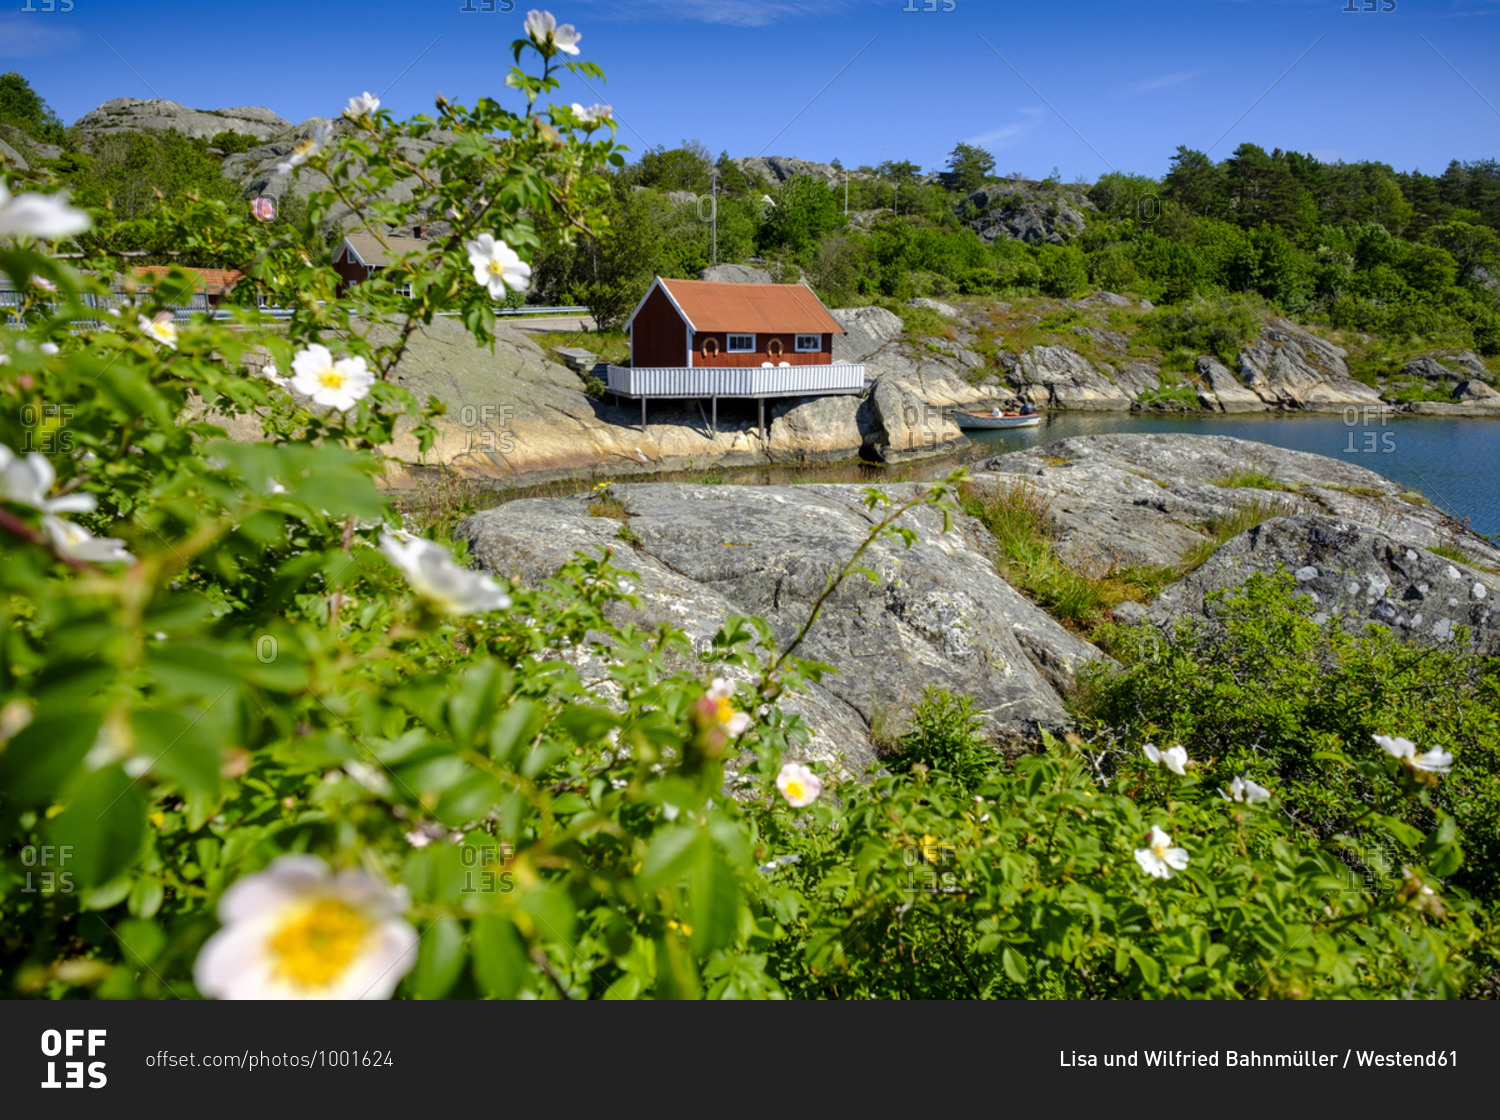 Flowering bush with small coastal house in background